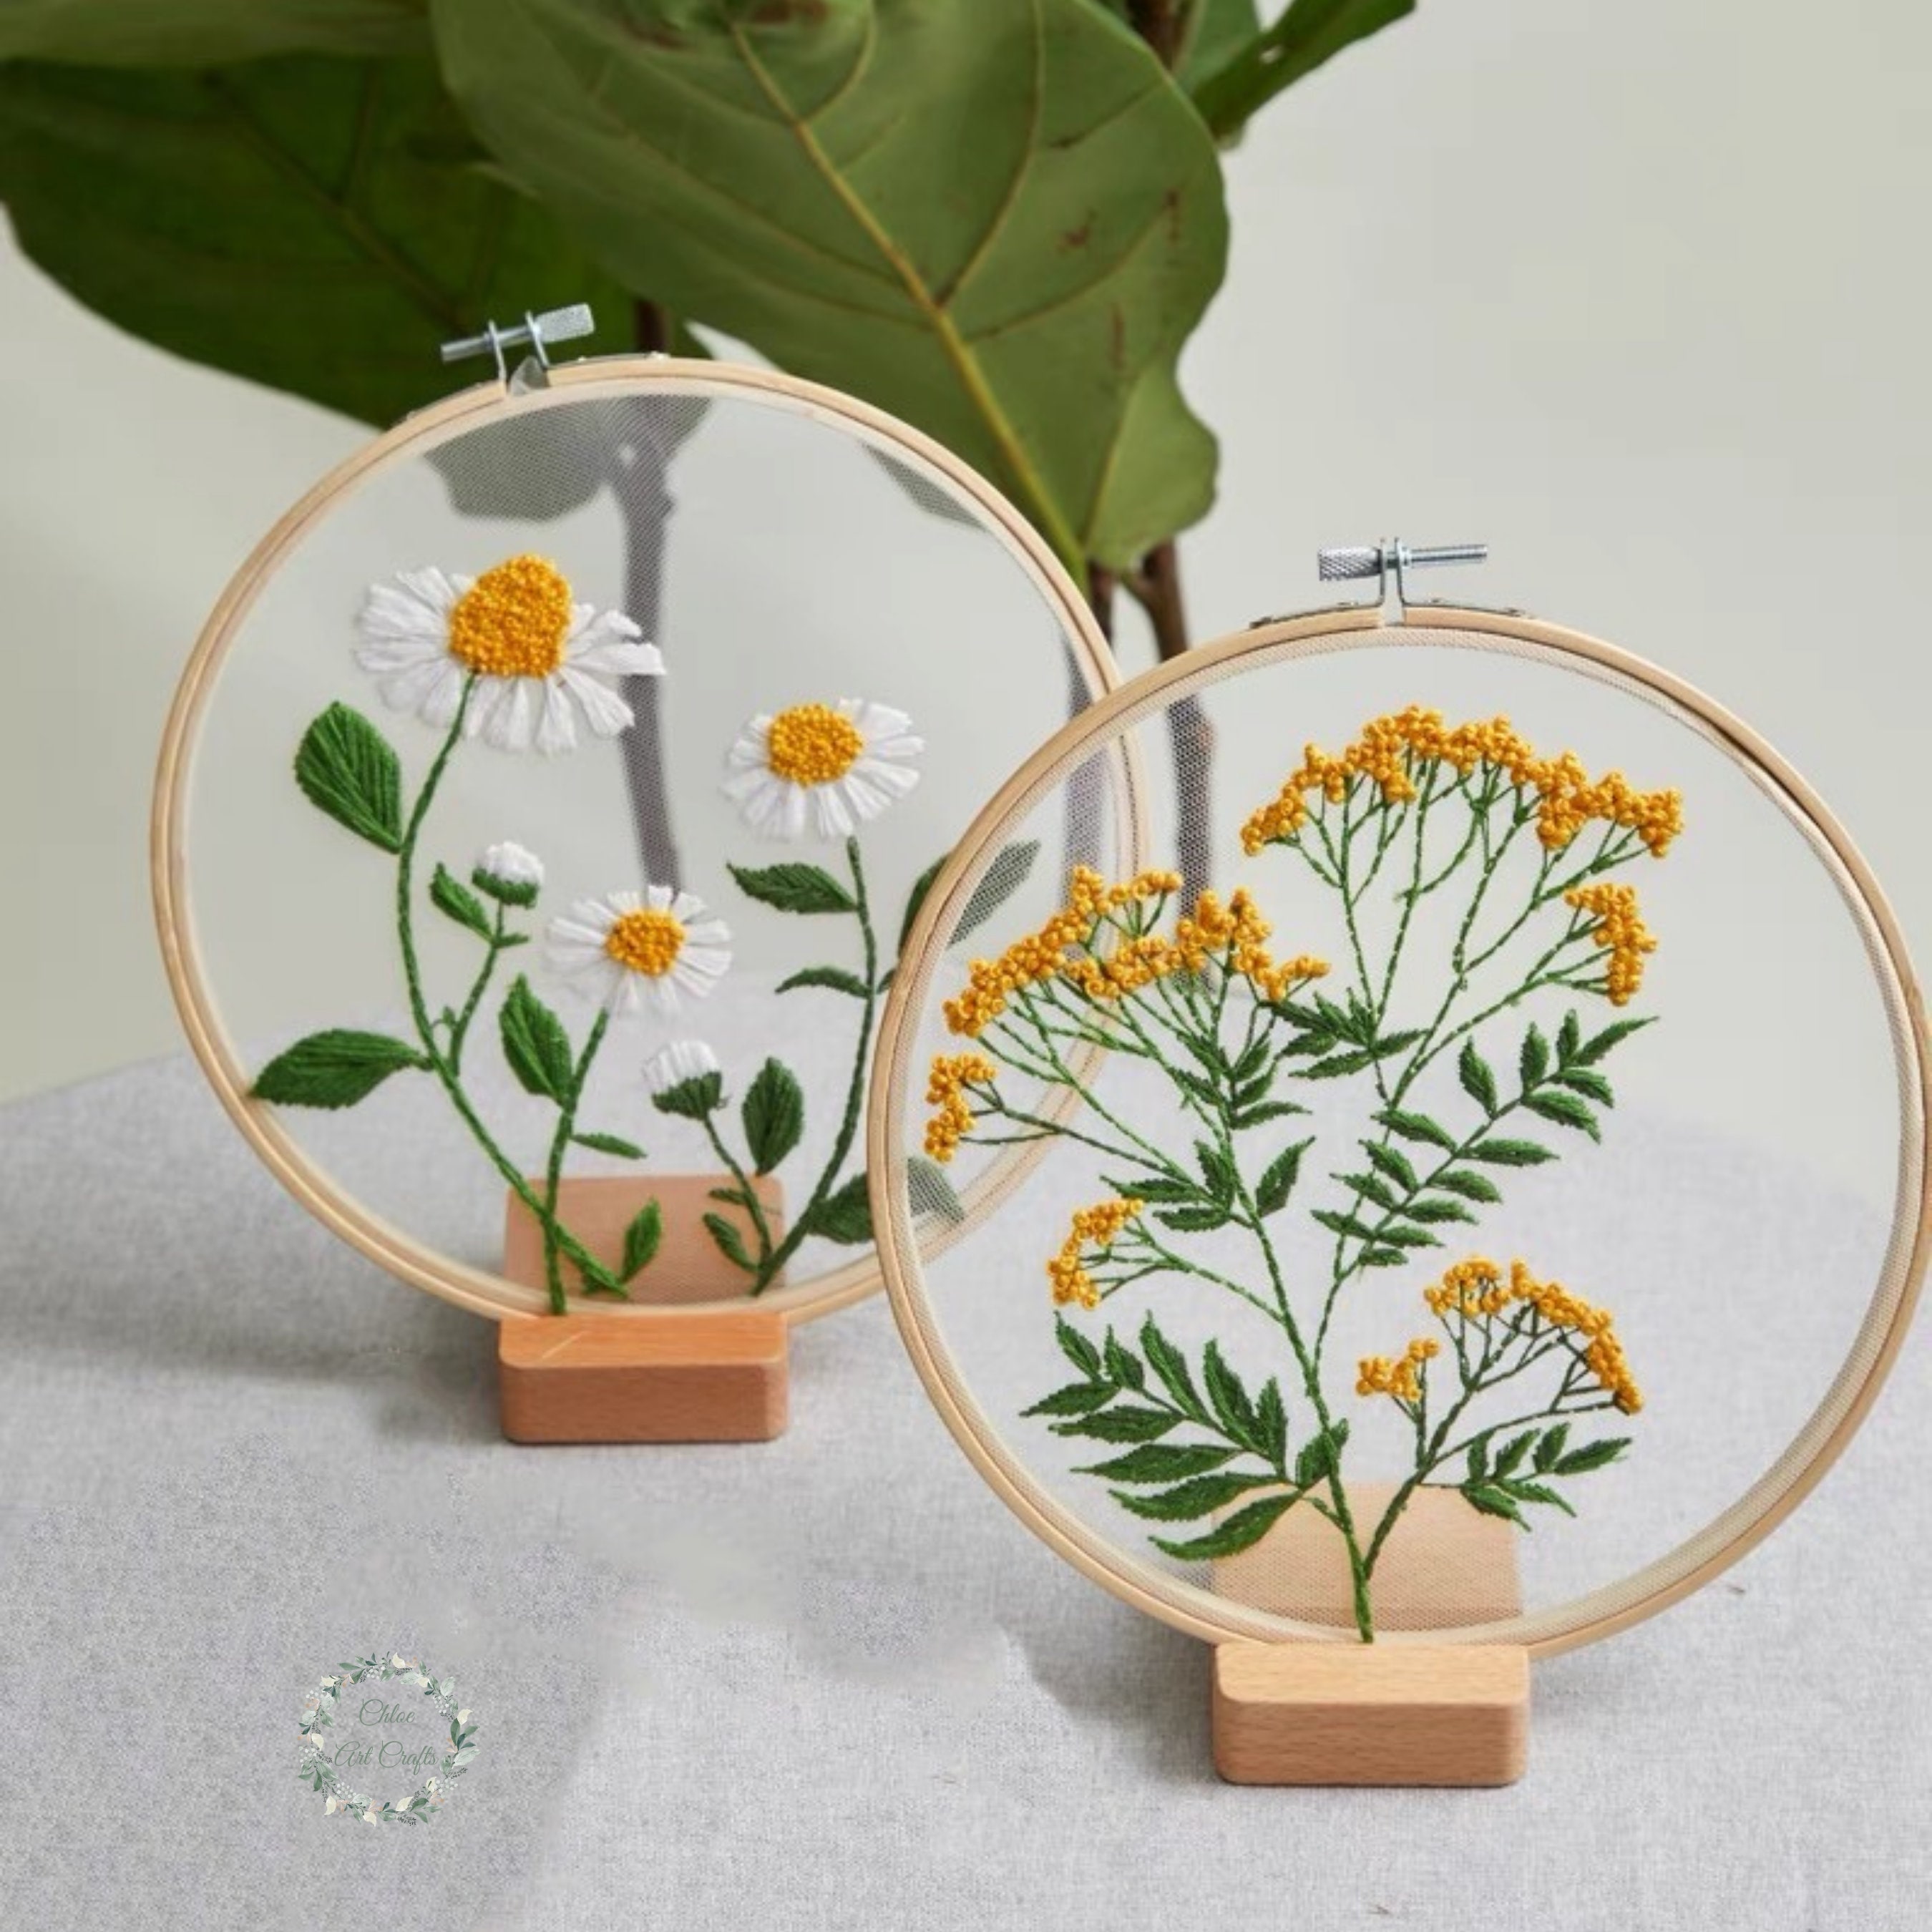 Keimprove Embroidery Kits with Plants Patterns Beginner Cross